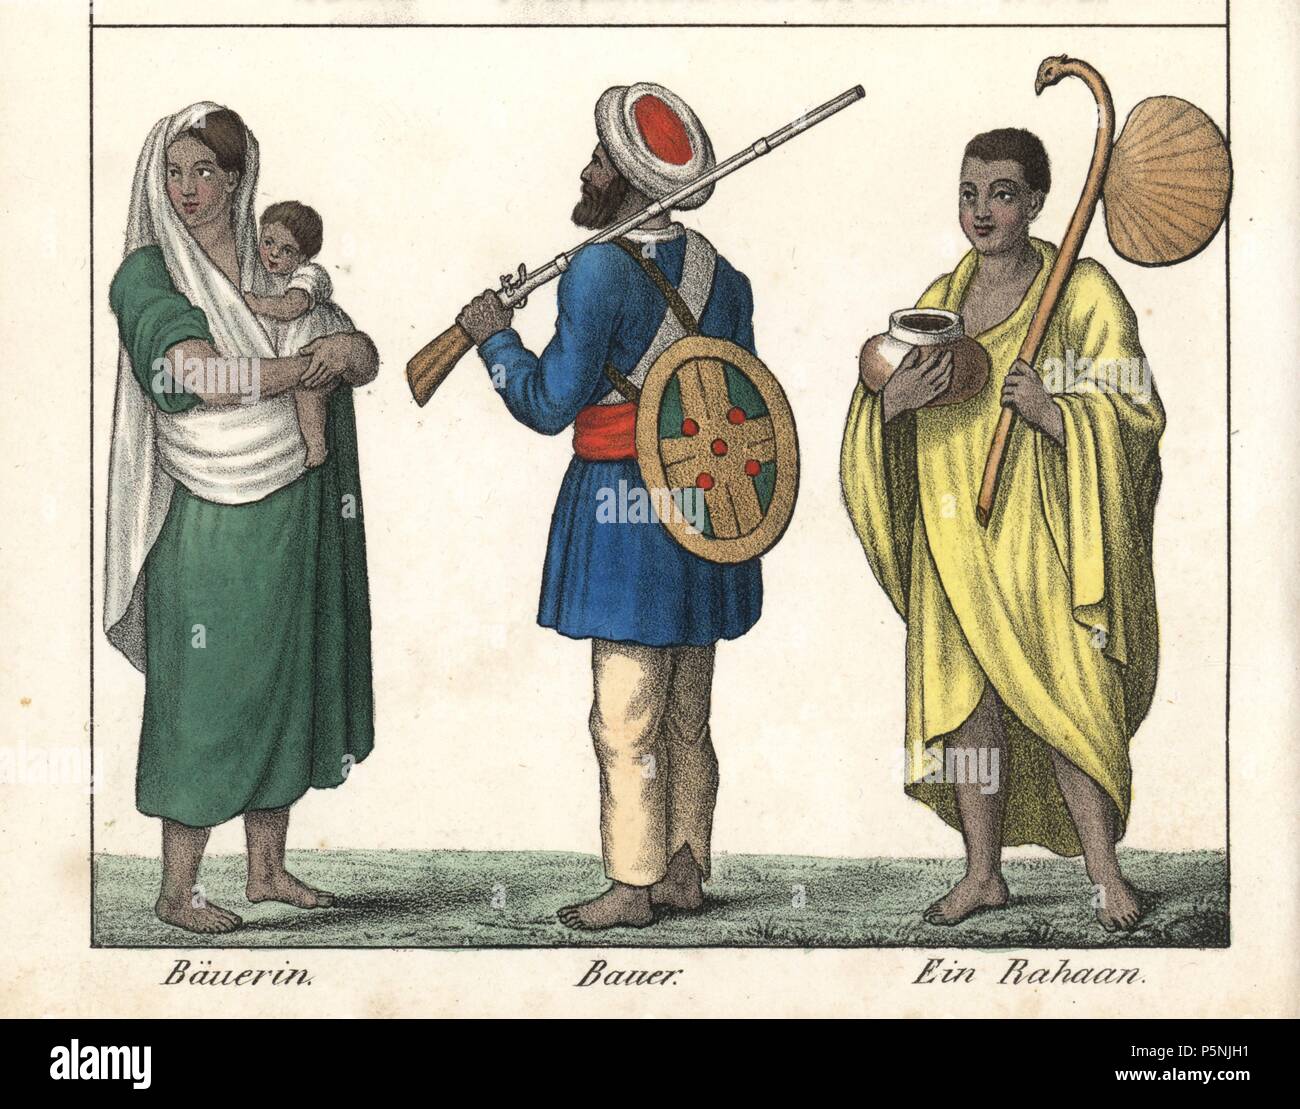 Costumes of Indian farmer with shield and rifle, woman farmer with baby, and monk with begging bowl and saffron robes. Handcoloured lithograph from Friedrich Wilhelm Goedsche's 'Vollstaendige Völkergallerie in getreuen Abbildungen' (Complete Gallery of Peoples in True Pictures), Meissen, circa 1835-1840. Goedsche (1785-1863) was a German writer, bookseller and publisher in Meissen. Many of the illustrations were adapted from Bertuch's 'Bilderbuch fur Kinder' and others. Stock Photo